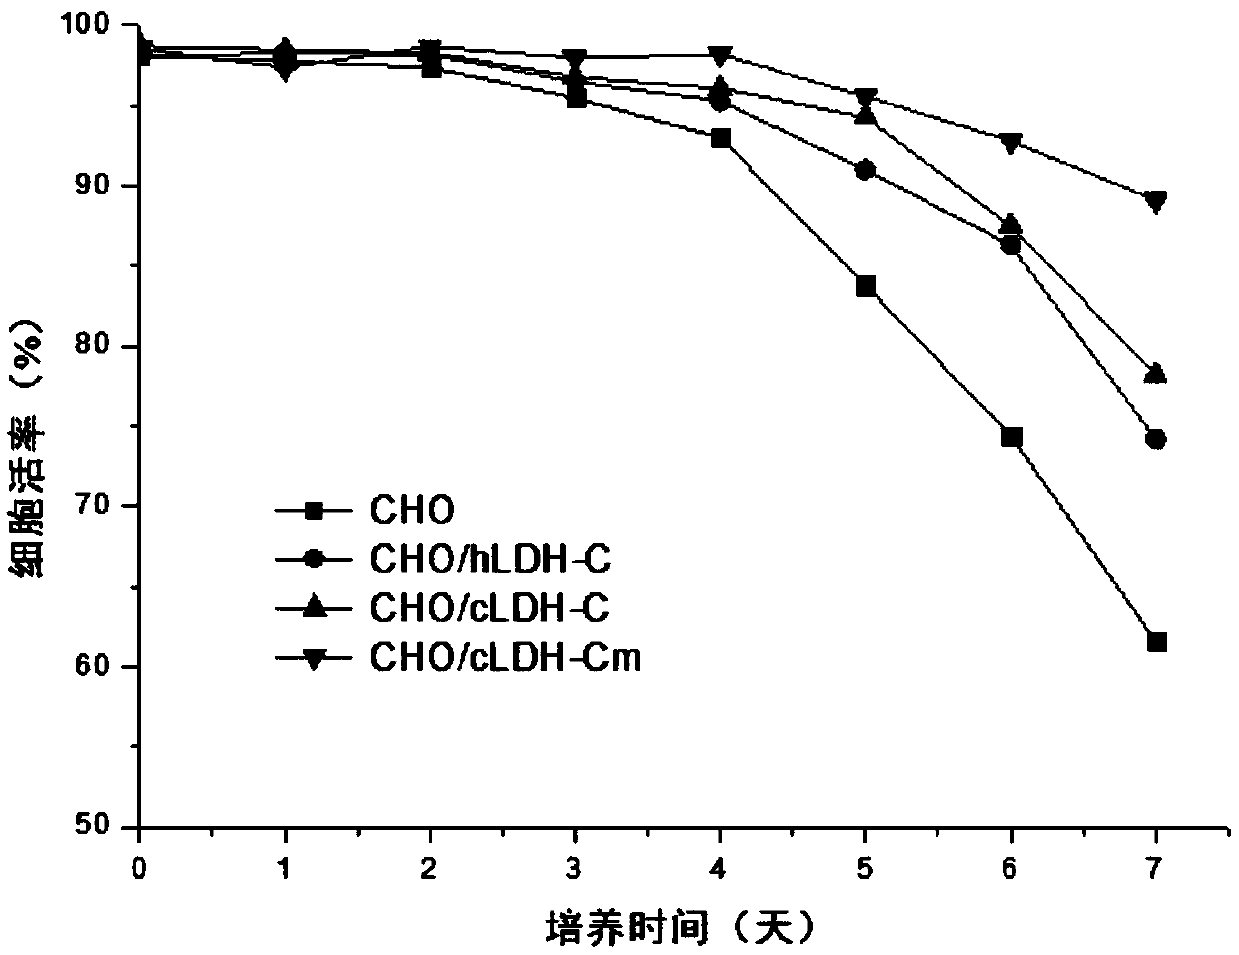 Method for increasing culture density of CHO cells